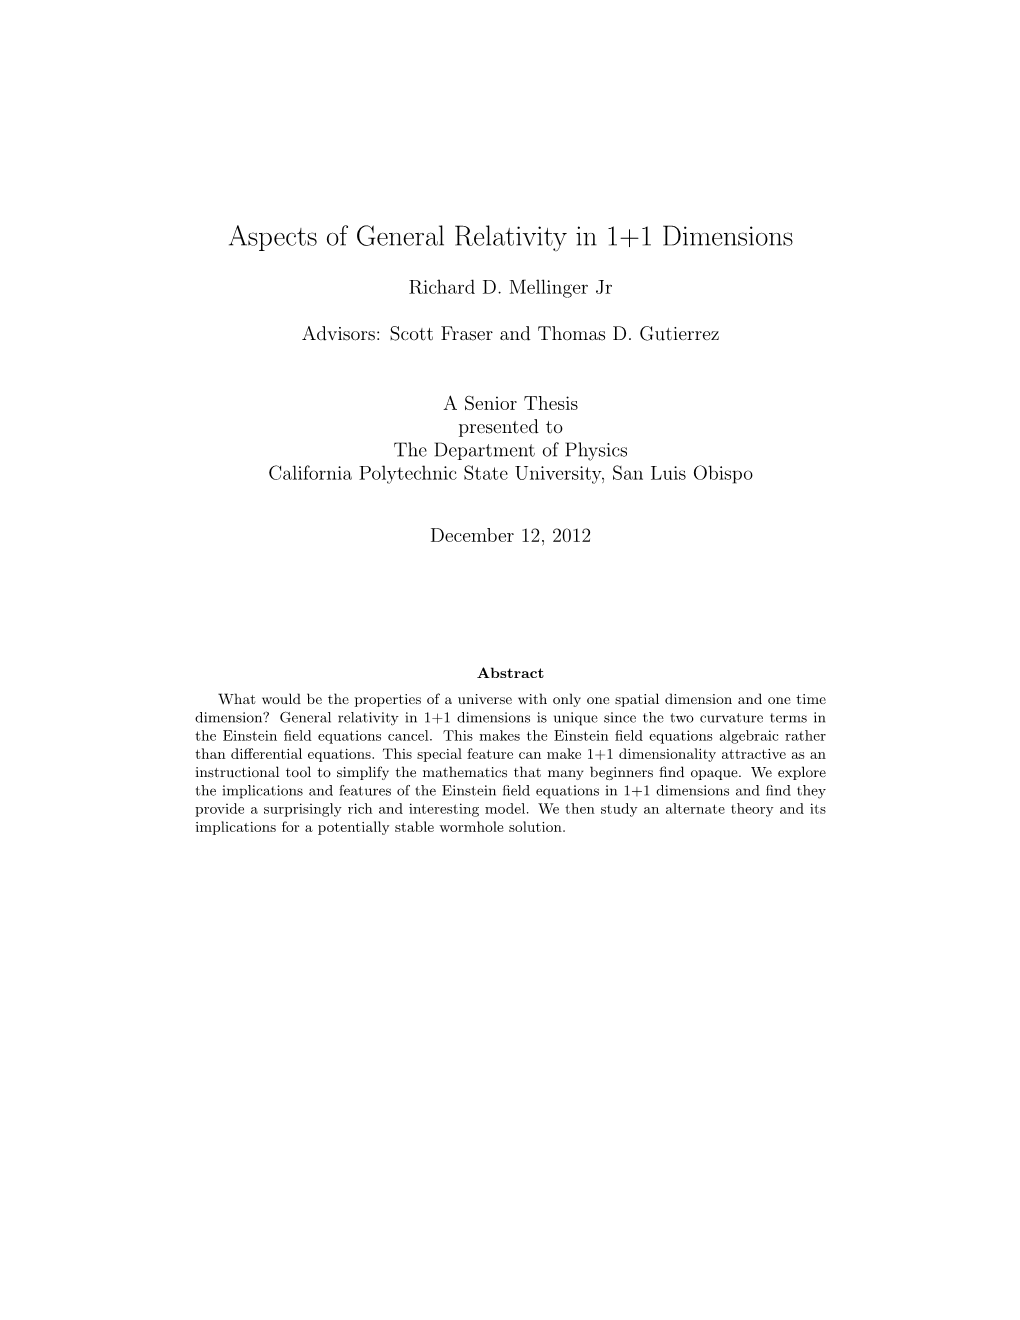 Aspects of General Relativity in 1+1 Dimensions